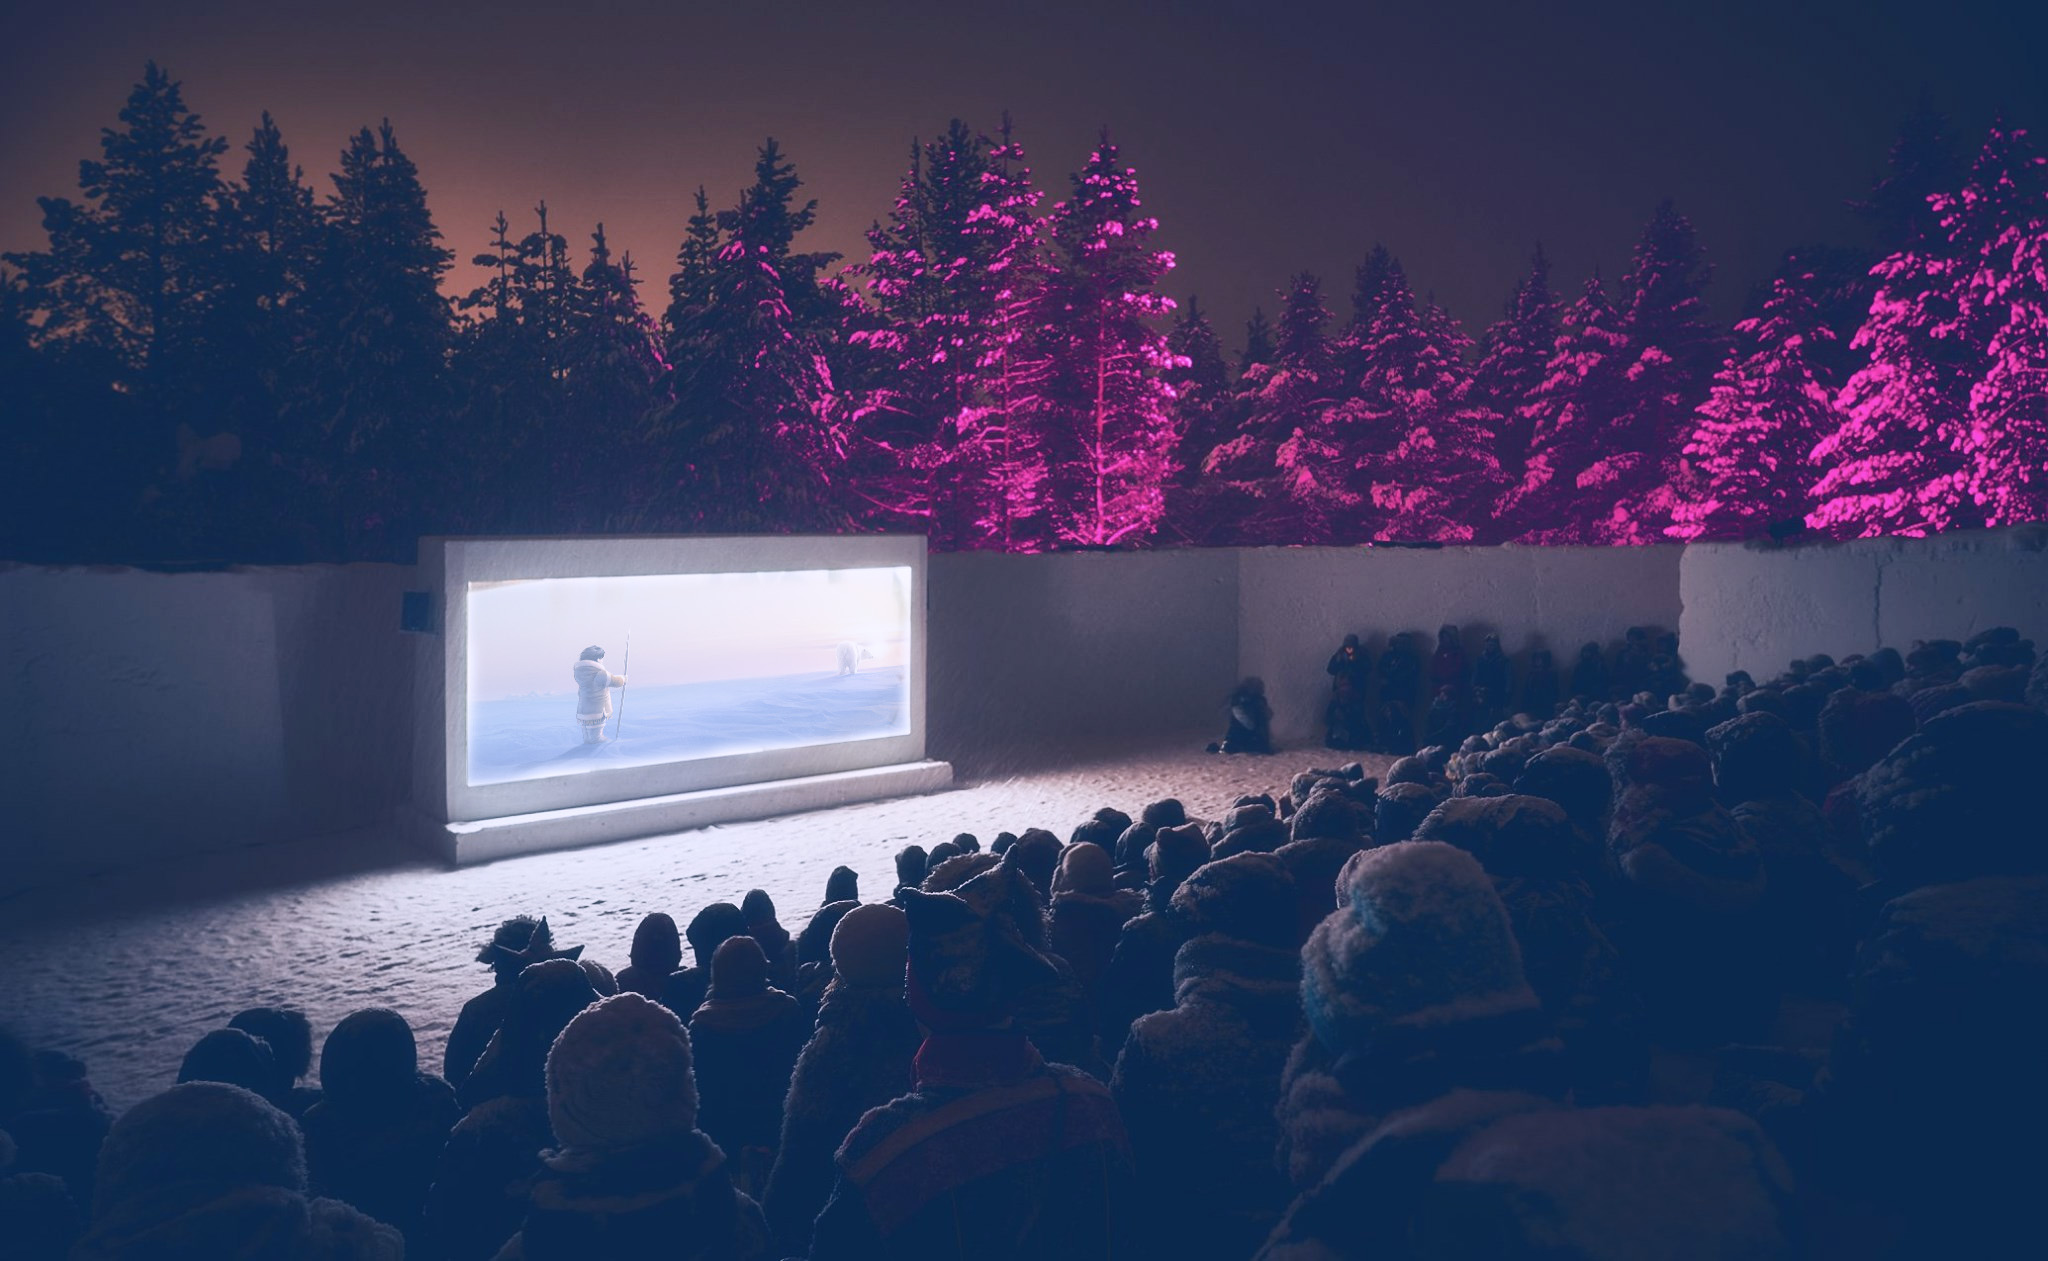 At the Snow Theatre, audiences watch a movie on a screen made of snow.